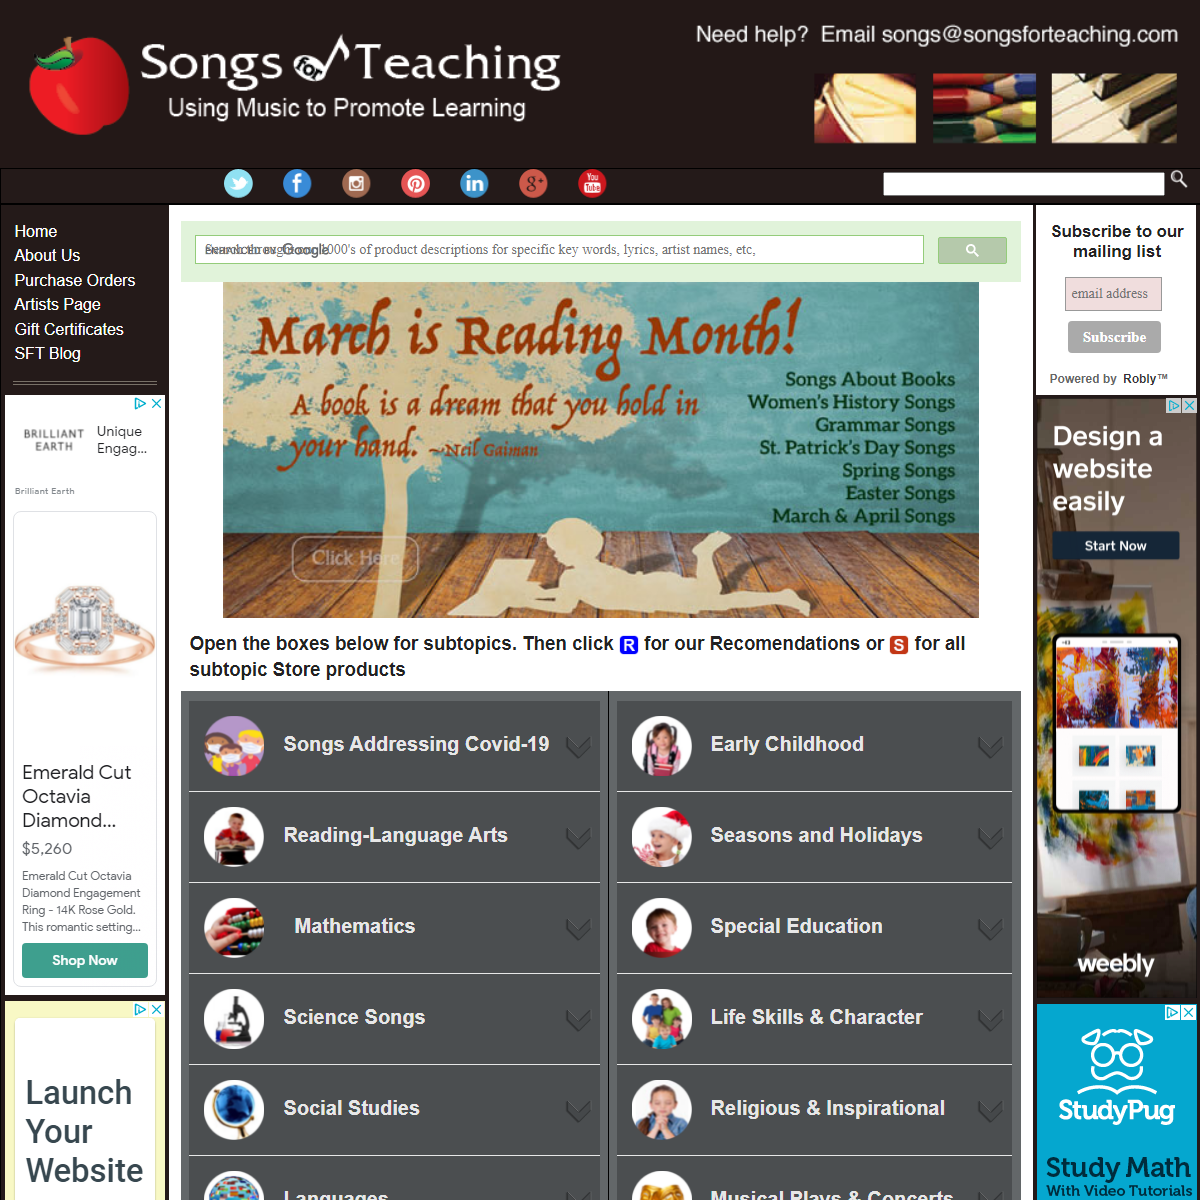 A complete backup of https://www.songsforteaching.com/index.html